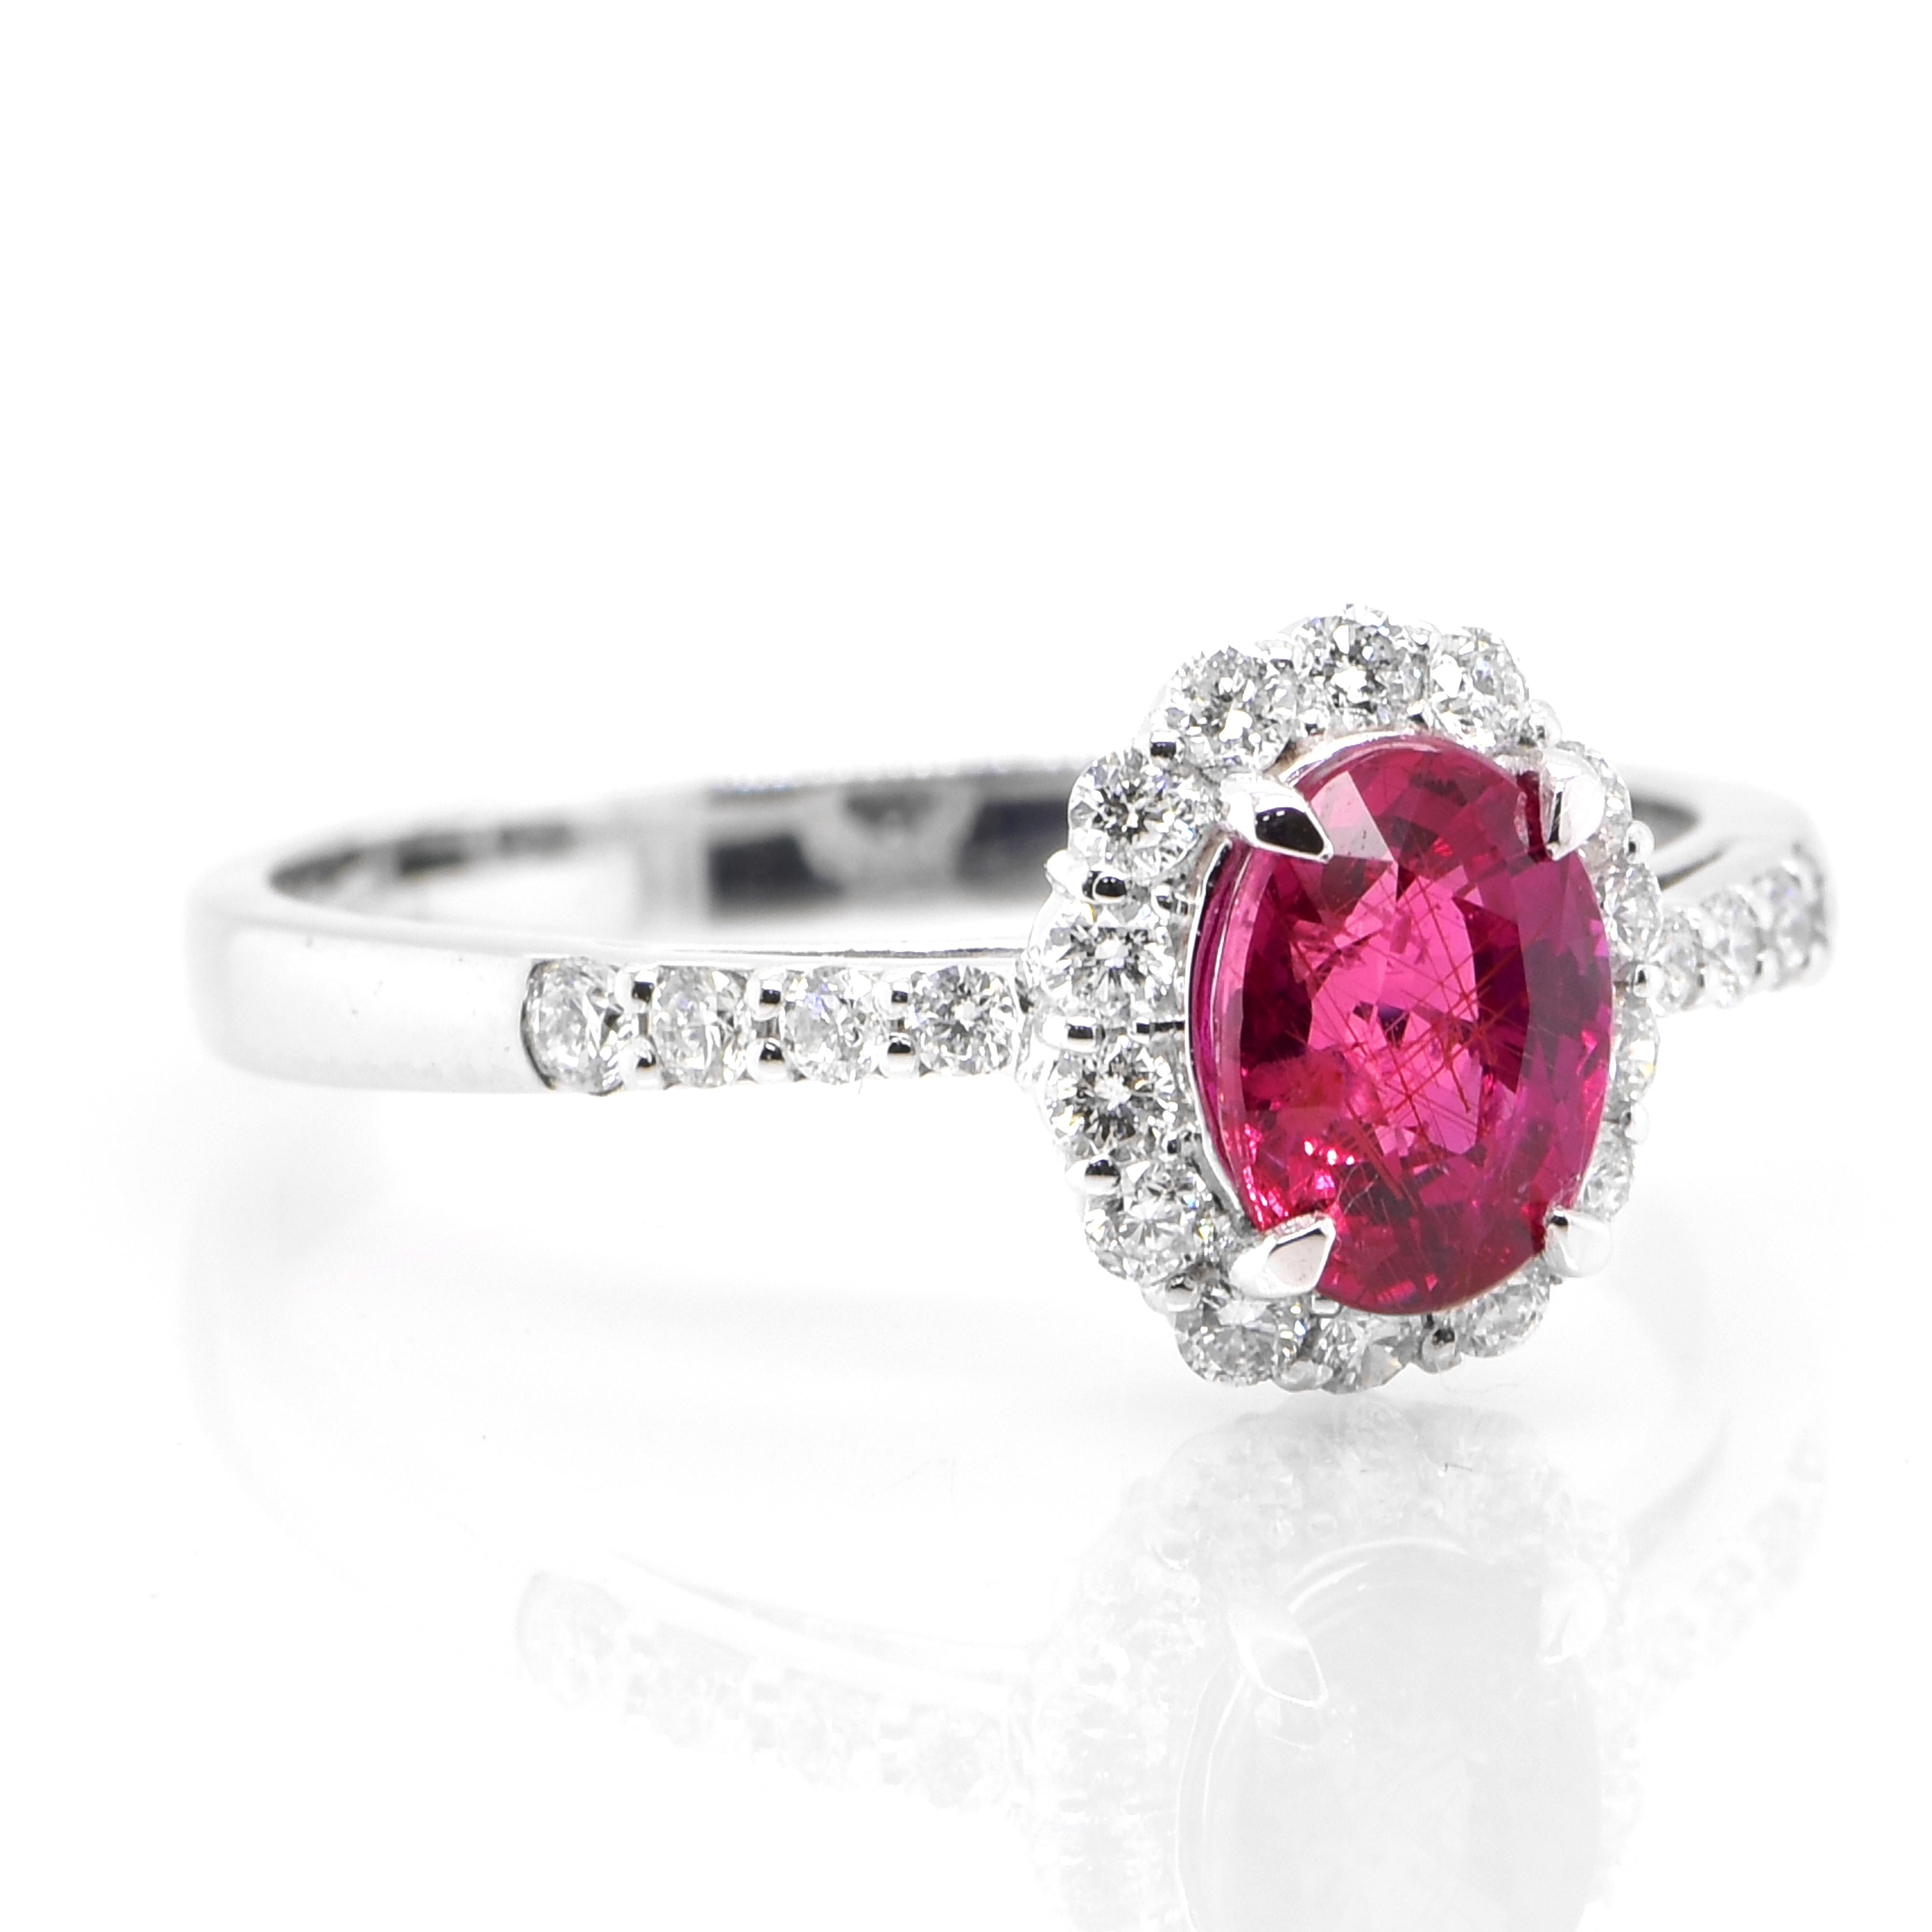 Modern GIA Certified 1.07 Carat Untreated Ruby & Diamond Cocktail Ring Made in Platinum For Sale